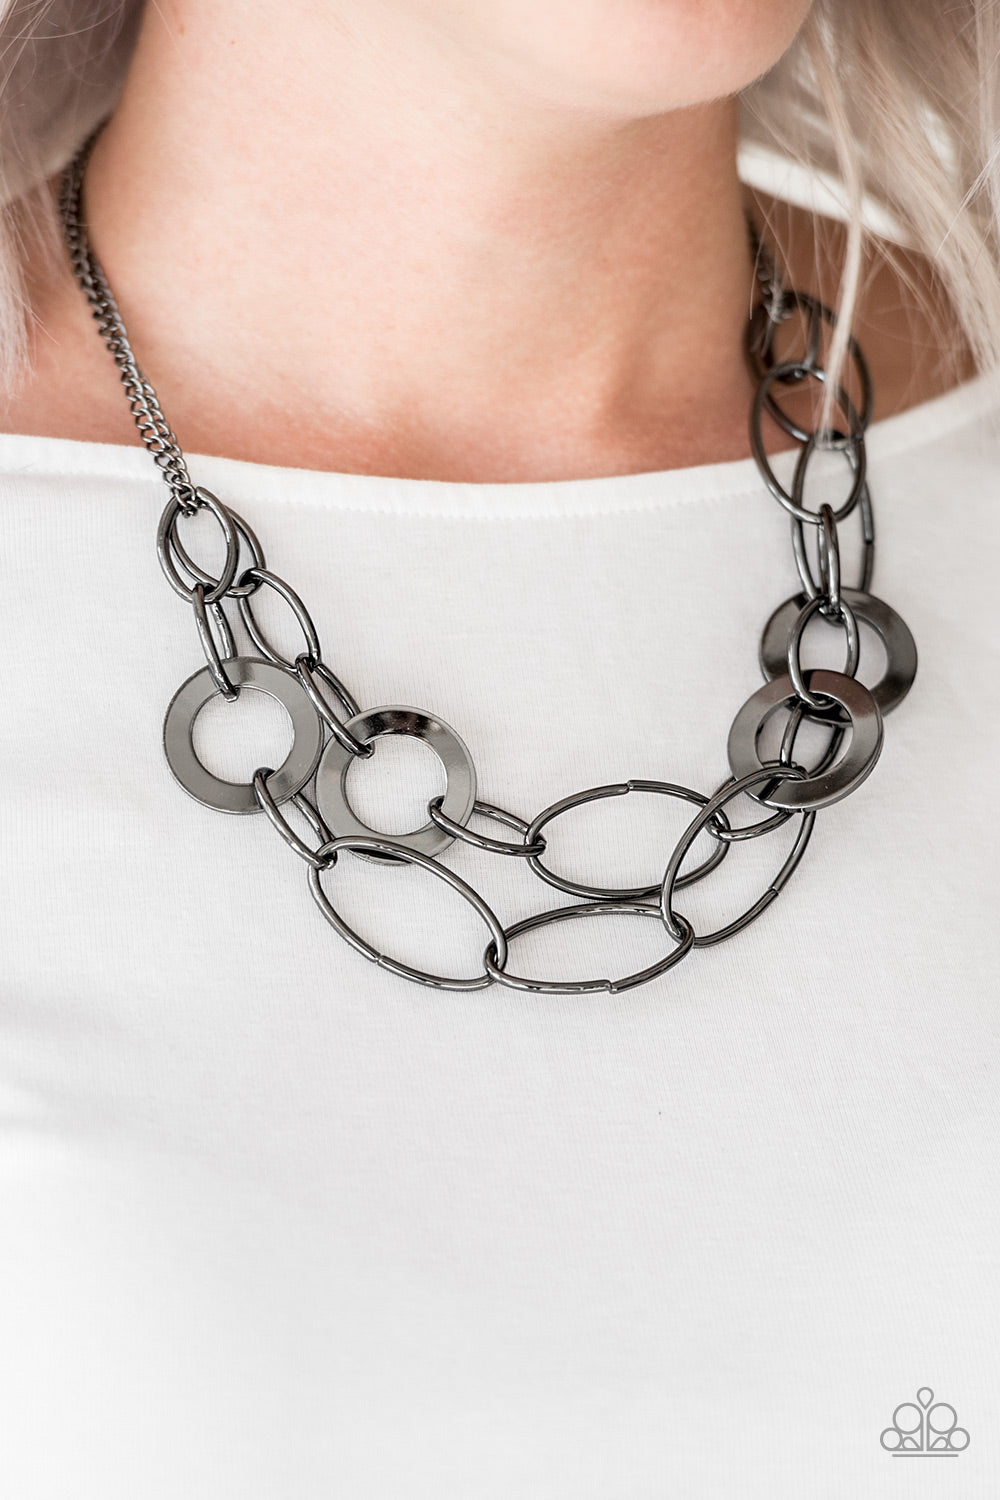 Stage Stunner - Black/Gunmetal Necklace - Chic Jewelry Boutique